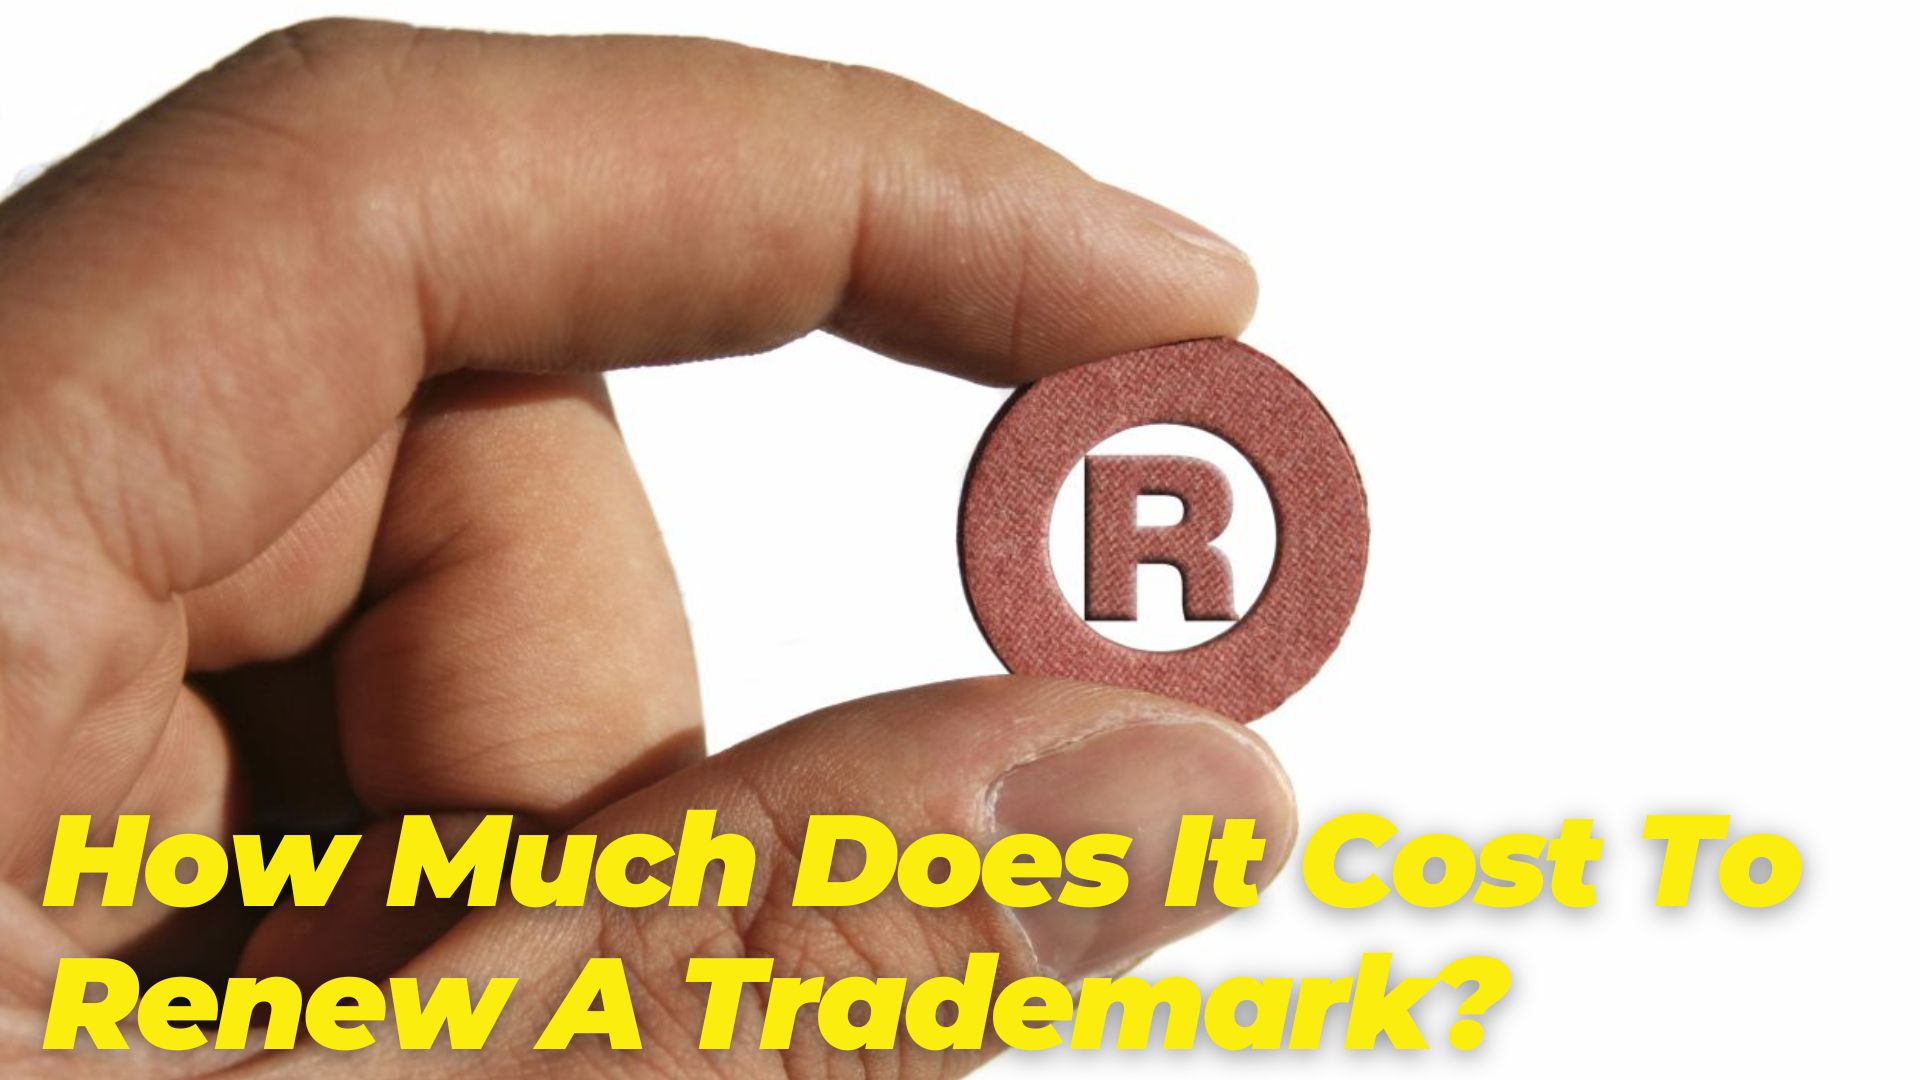 How Much Does It Cost To Renew A Trademark?